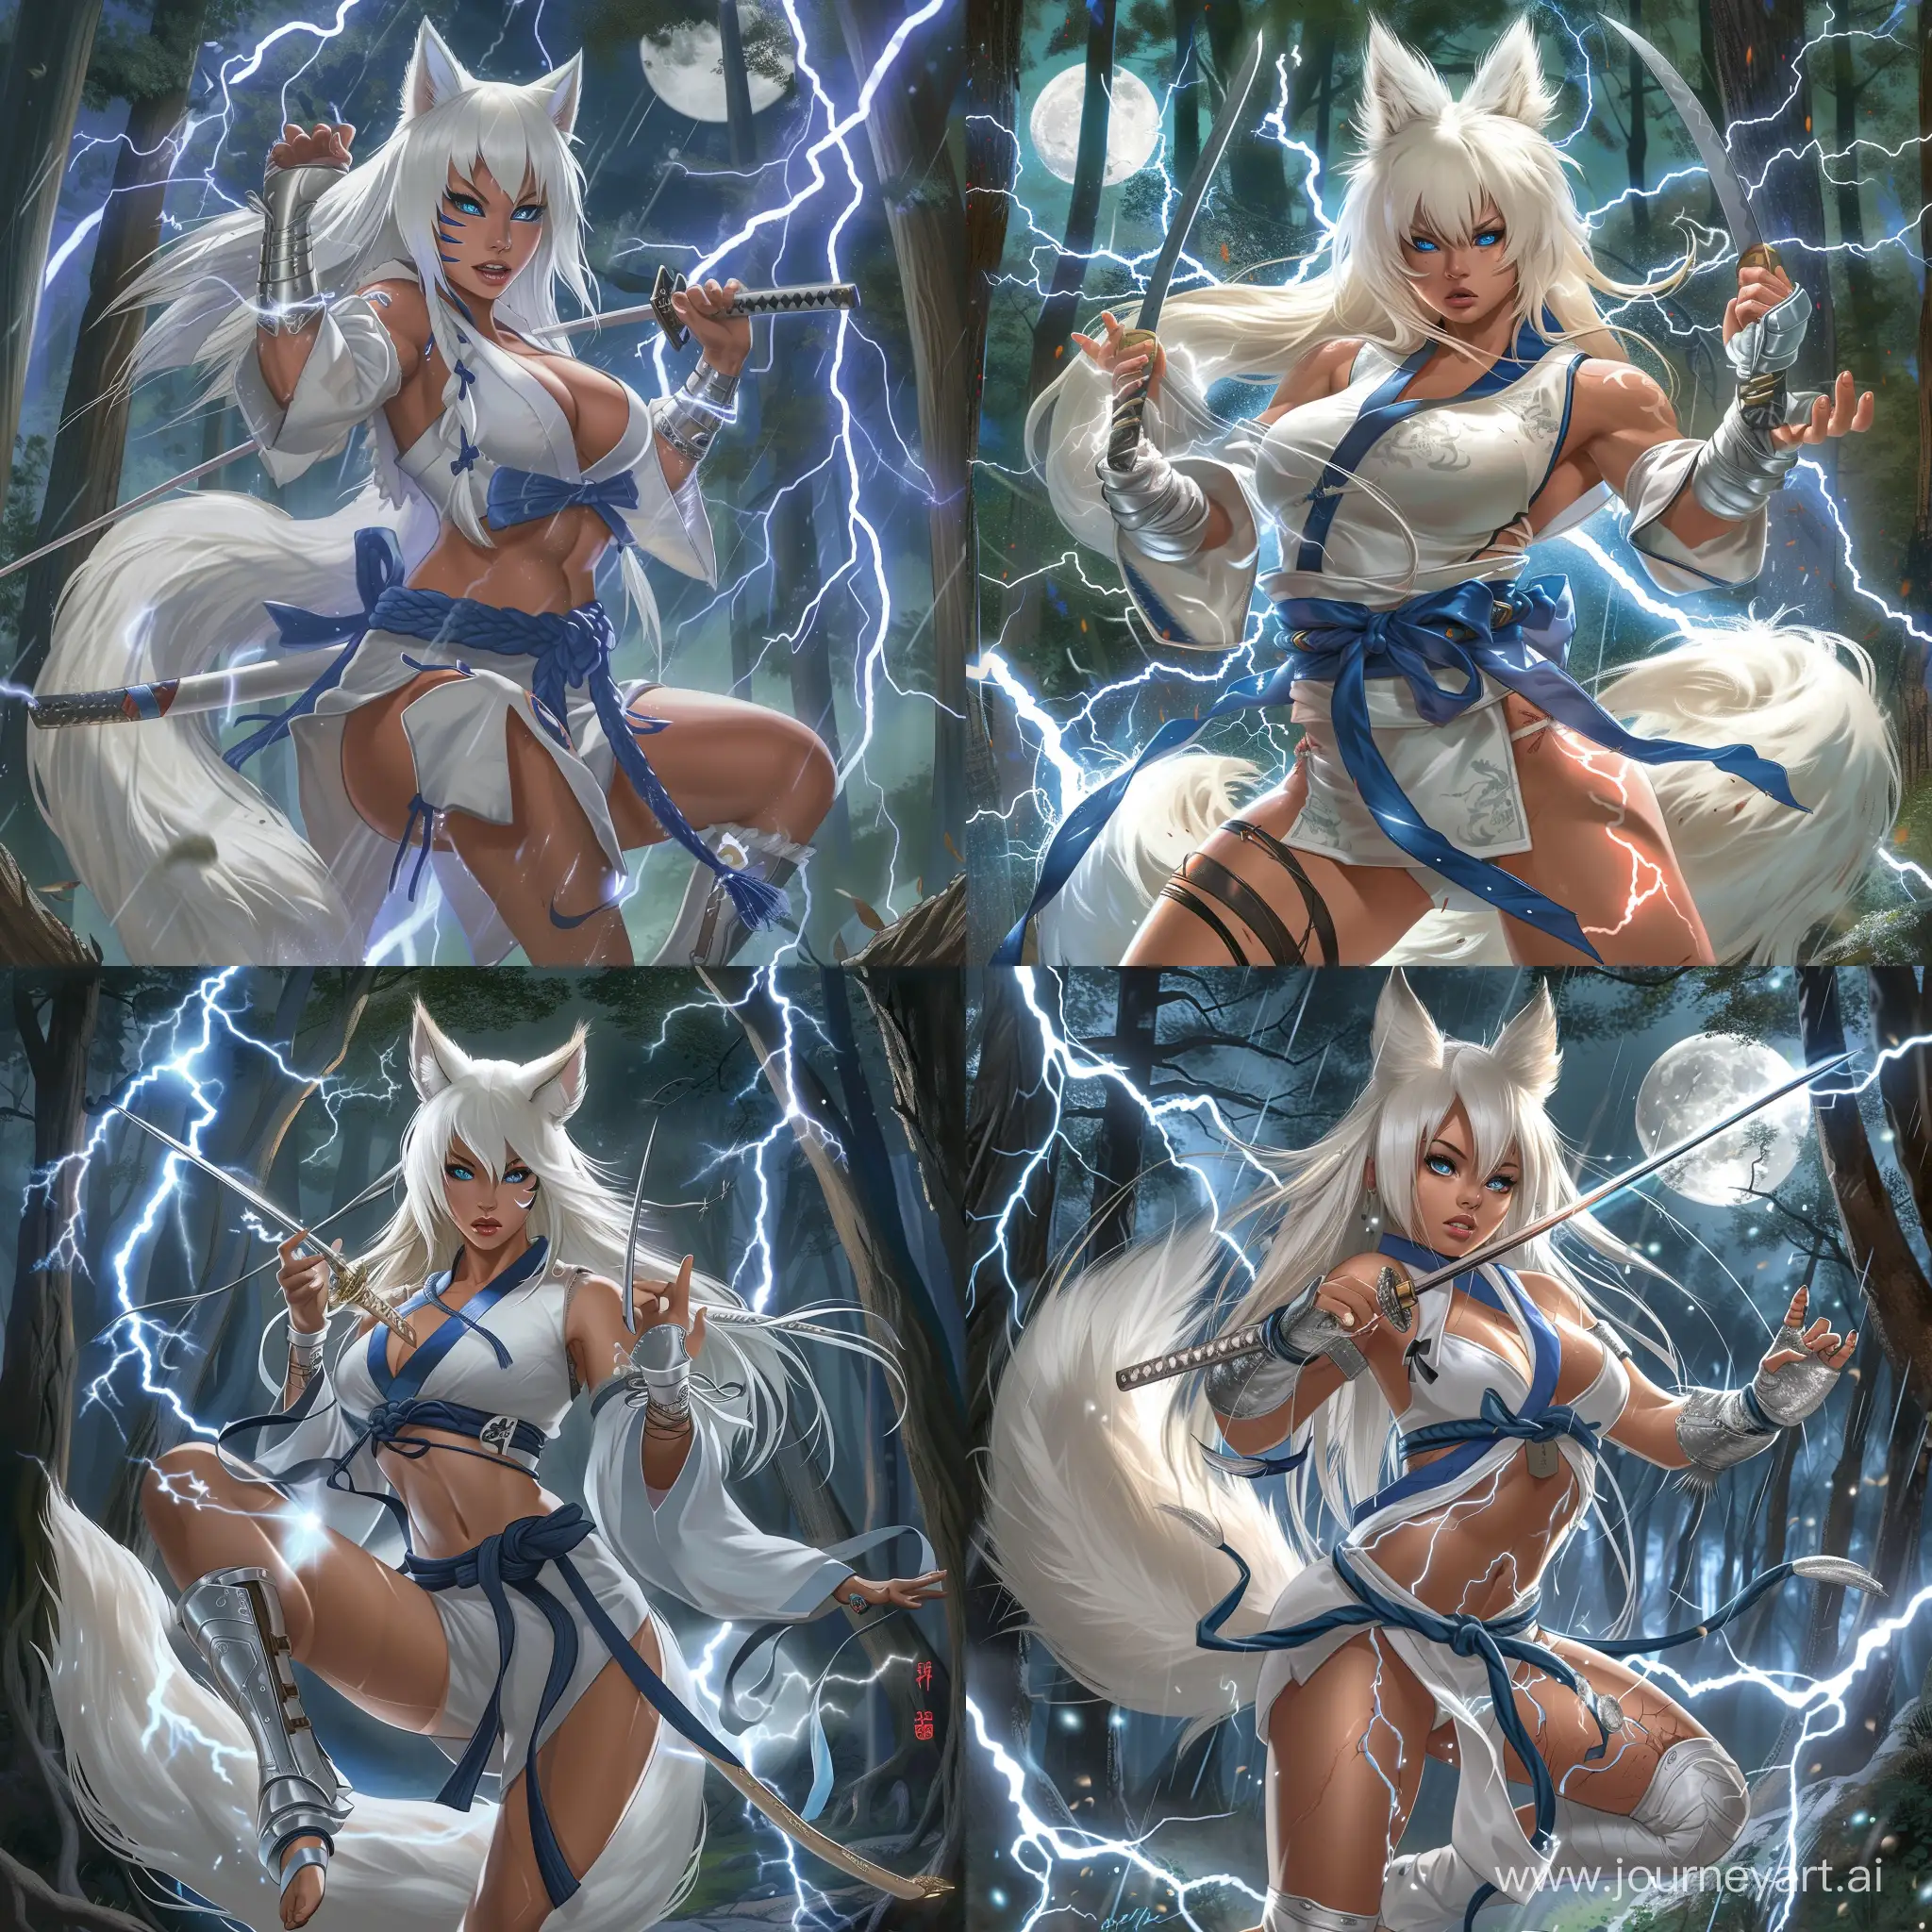 anime-style, full body, athletic, muscular, tan skin, adult, asian woman, long white hair, white fox ears, white fox tail attached to her waist, fierce blue eyes, wearing a white and blue martial arts gi, holding a katana, dynamic, silver gauntlets, silver boots, using lightning magic, surrounded by lightning, forest, night, full moon